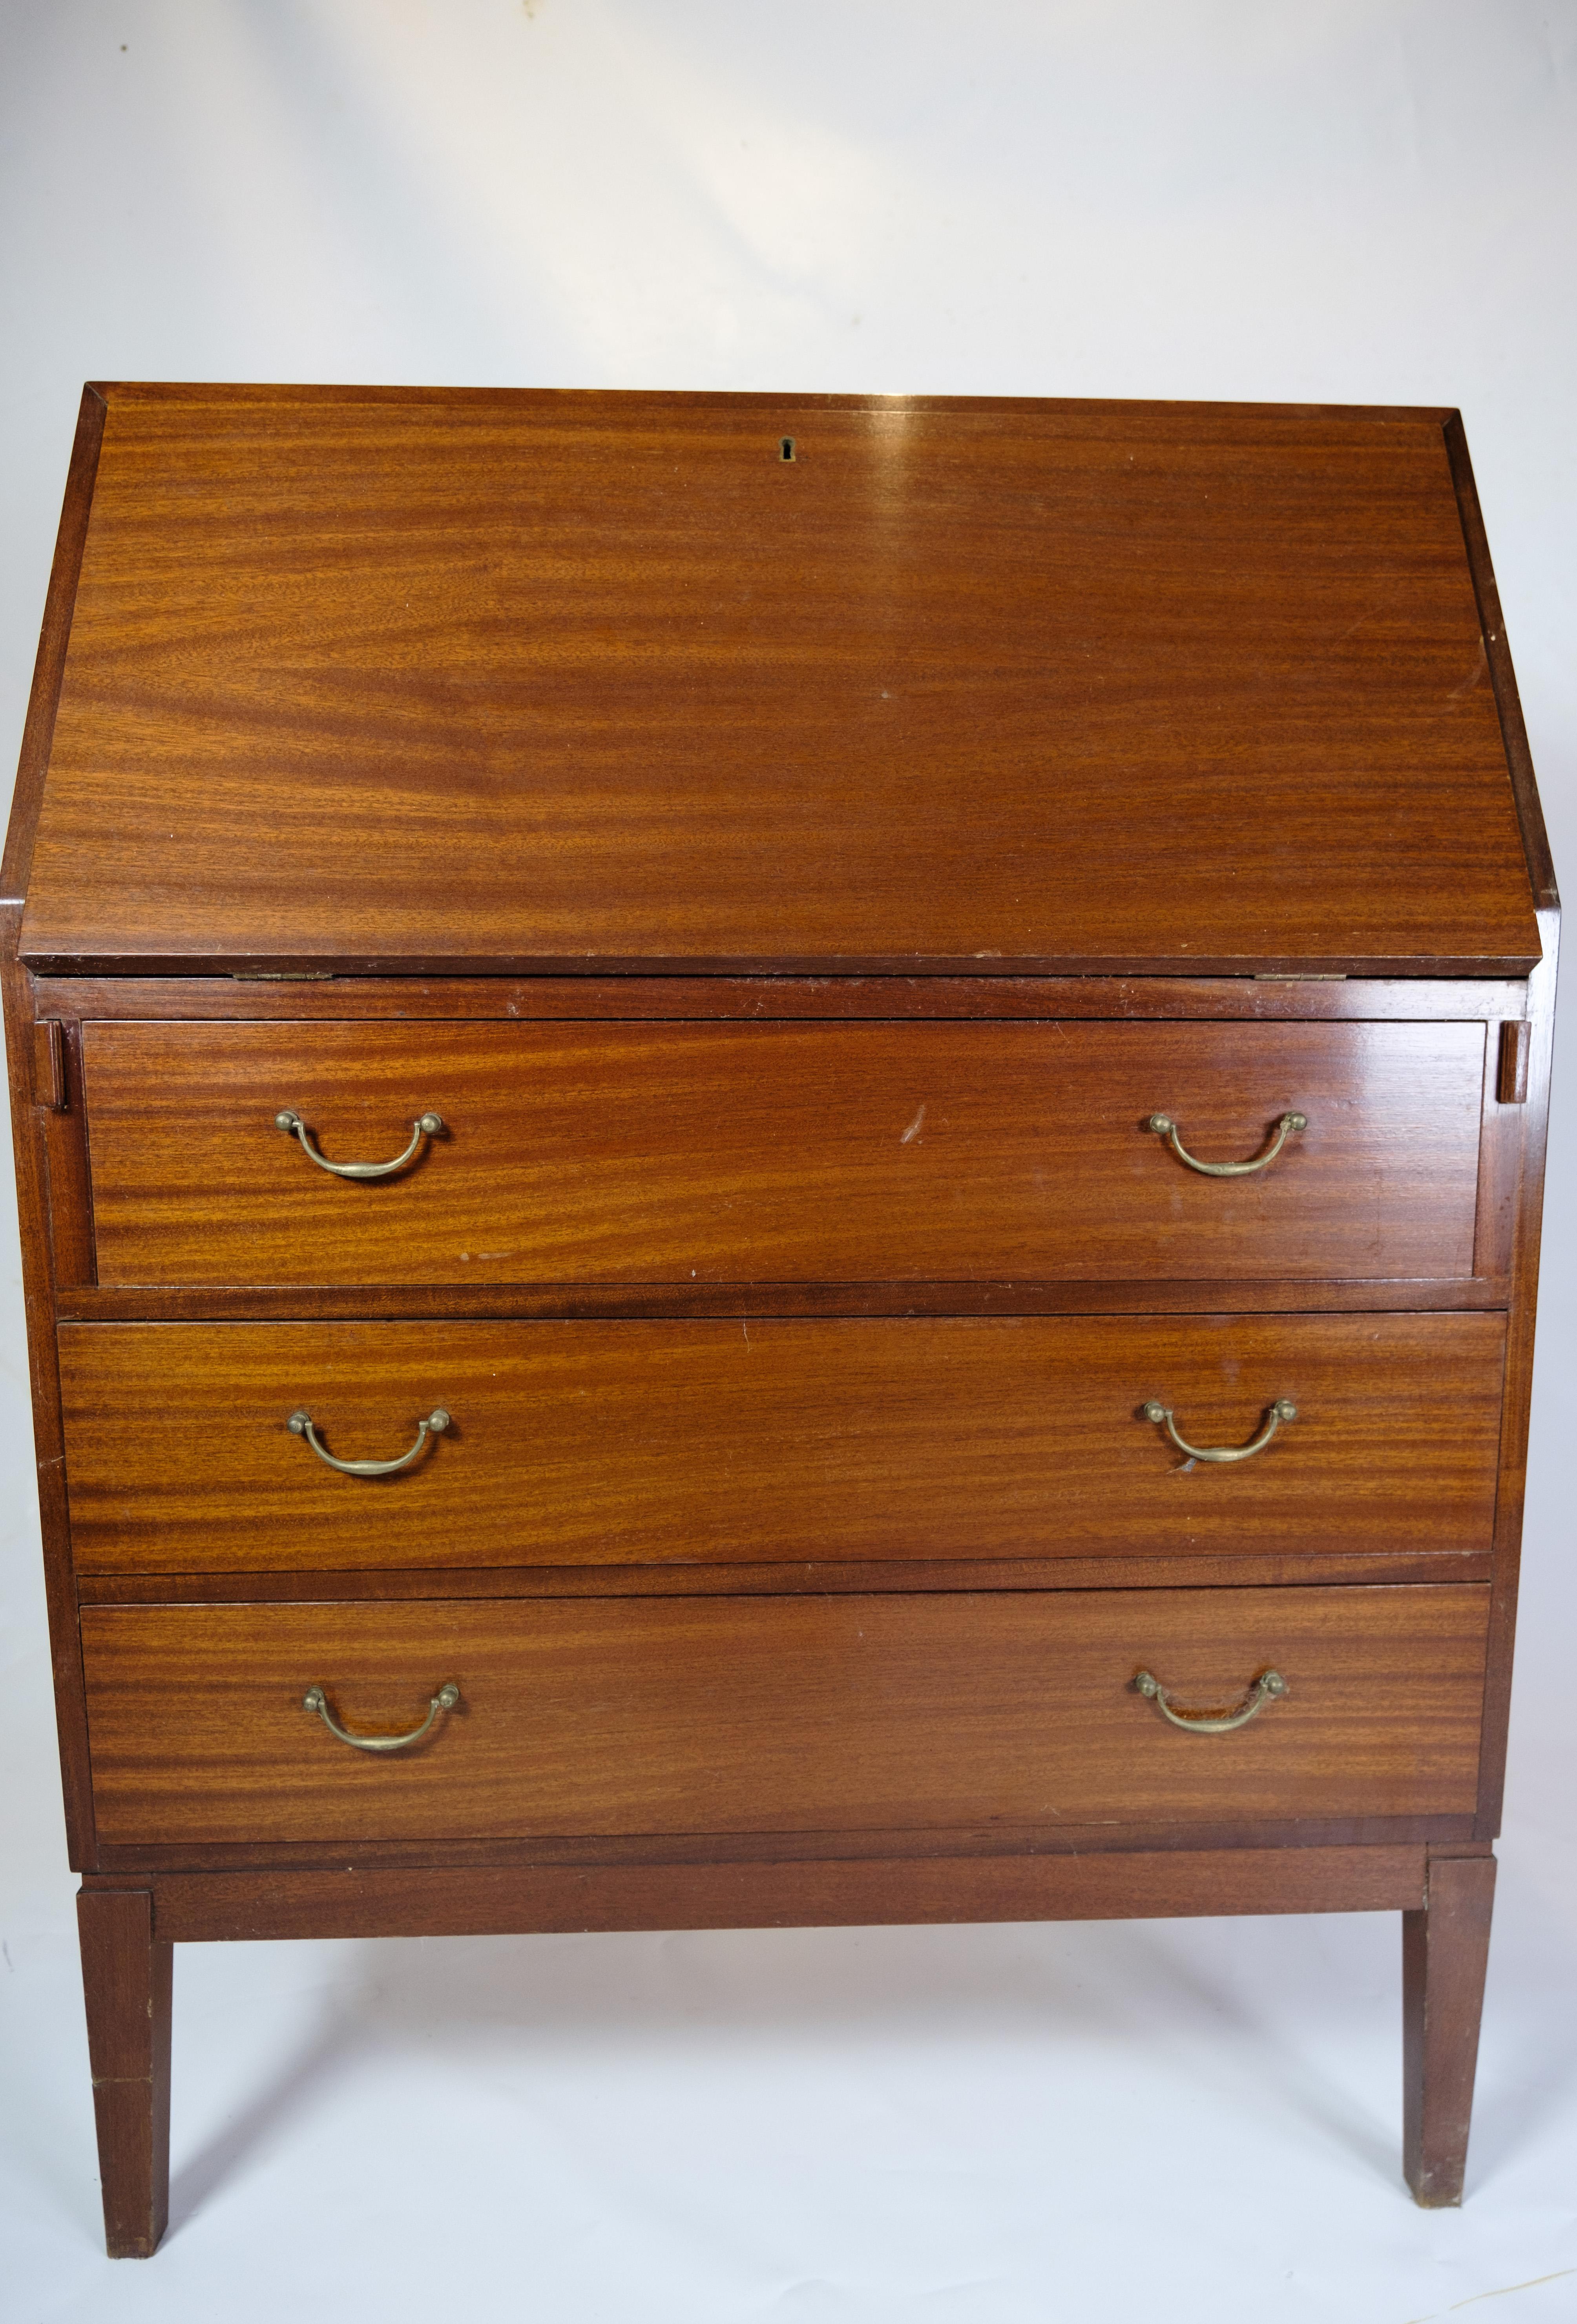 This chatol with three drawers is furniture craftsmanship from the 1920s. Crafted in light mahogany and adorned with brass handles and fittings, it exudes both elegance and functionality.

With its internal shelves and spacious drawers, this chatol